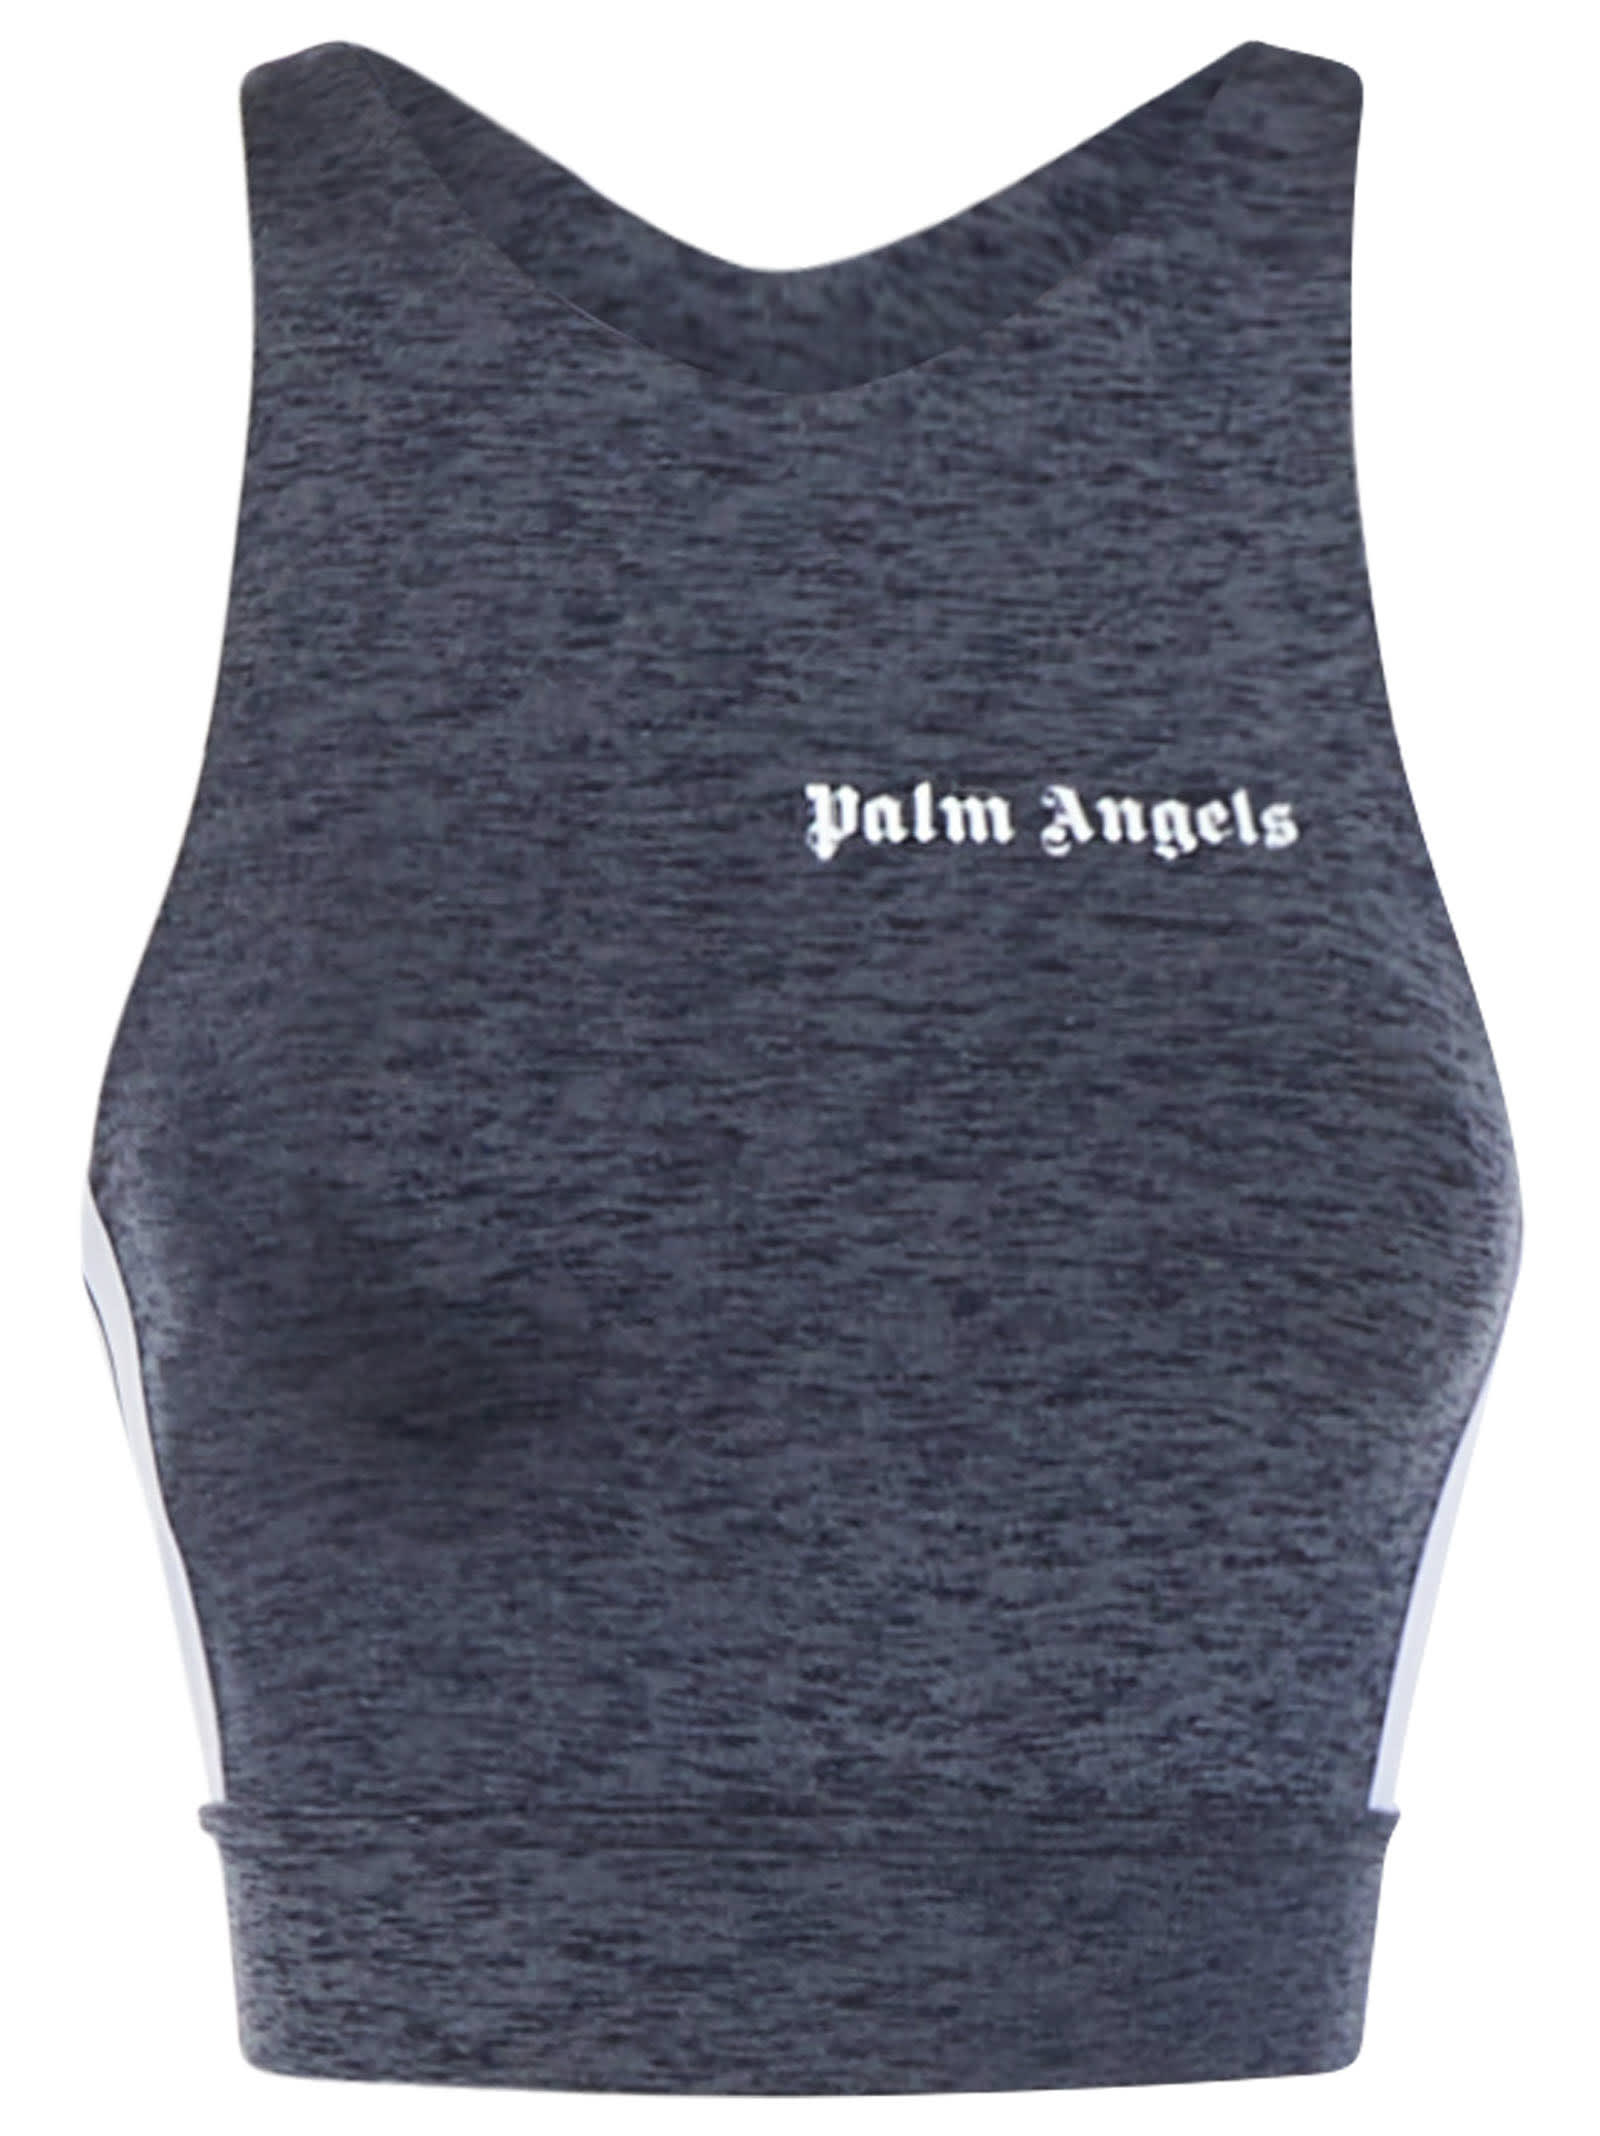 PALM ANGELS TRAINING TRACK TOP